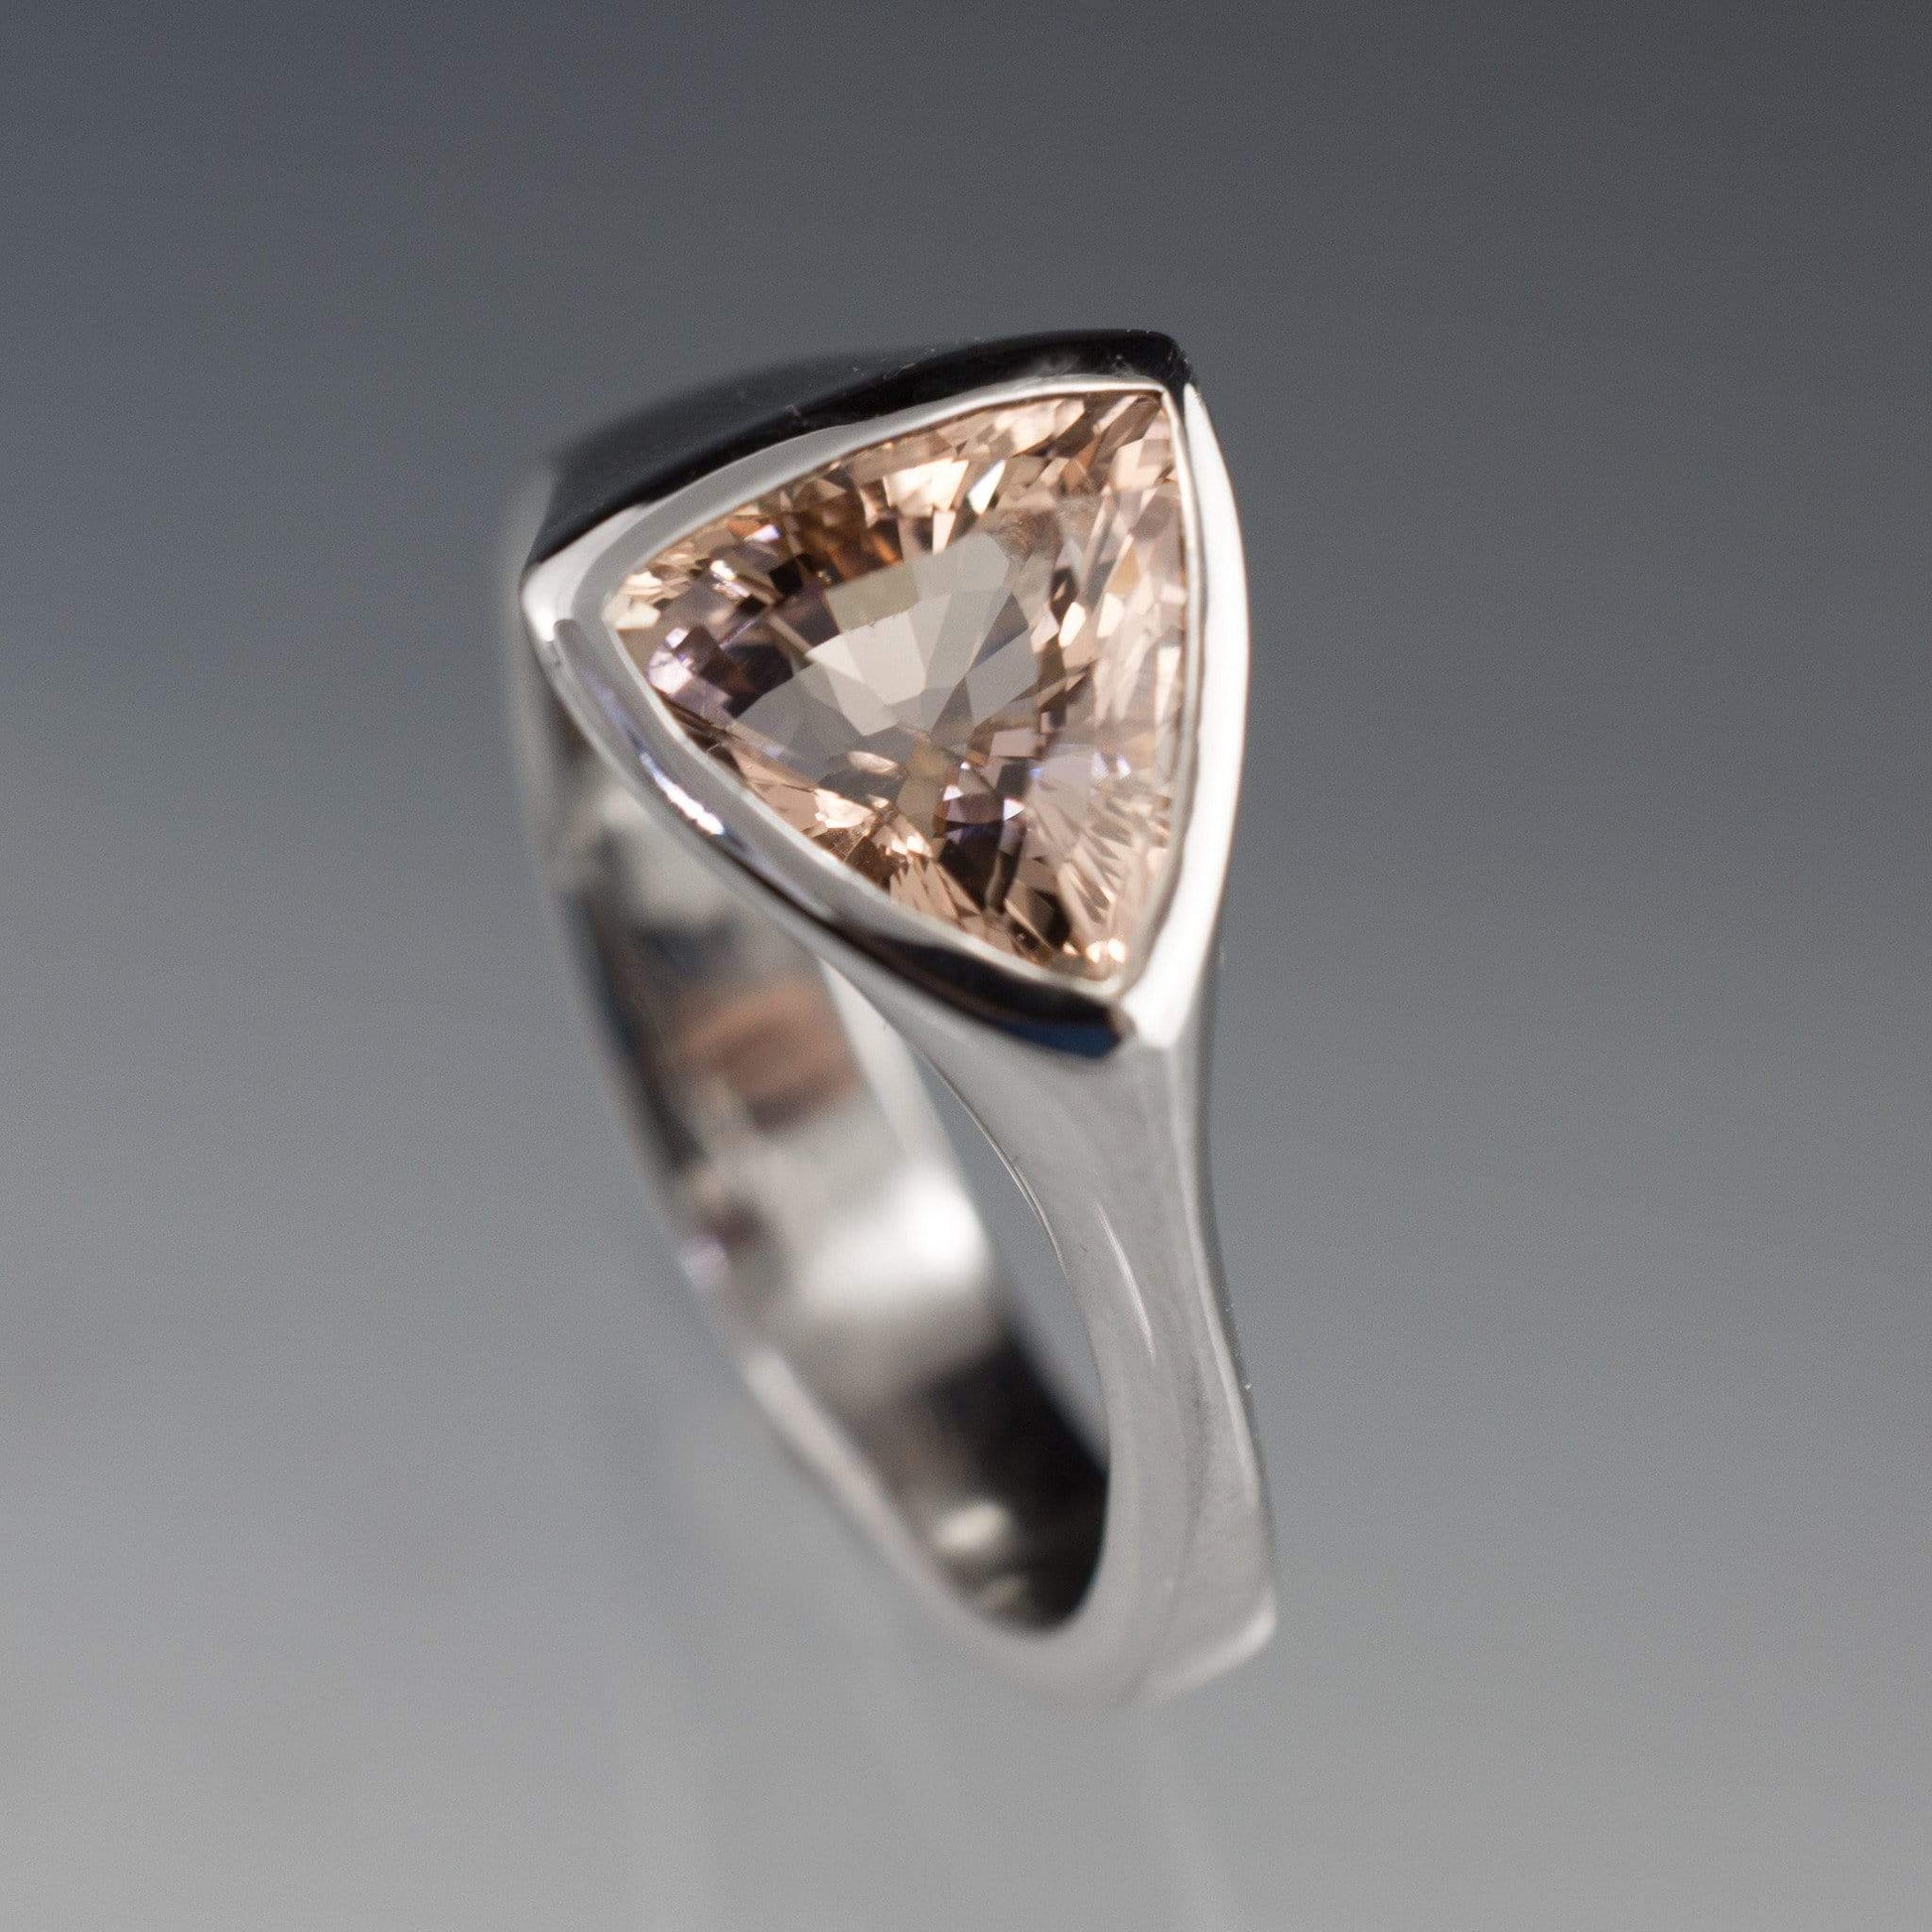 Trillion Pink Morganite Bezel Solitaire Engagement Ring 8mm/1.5ct / 18kPD White Gold Ring by Nodeform